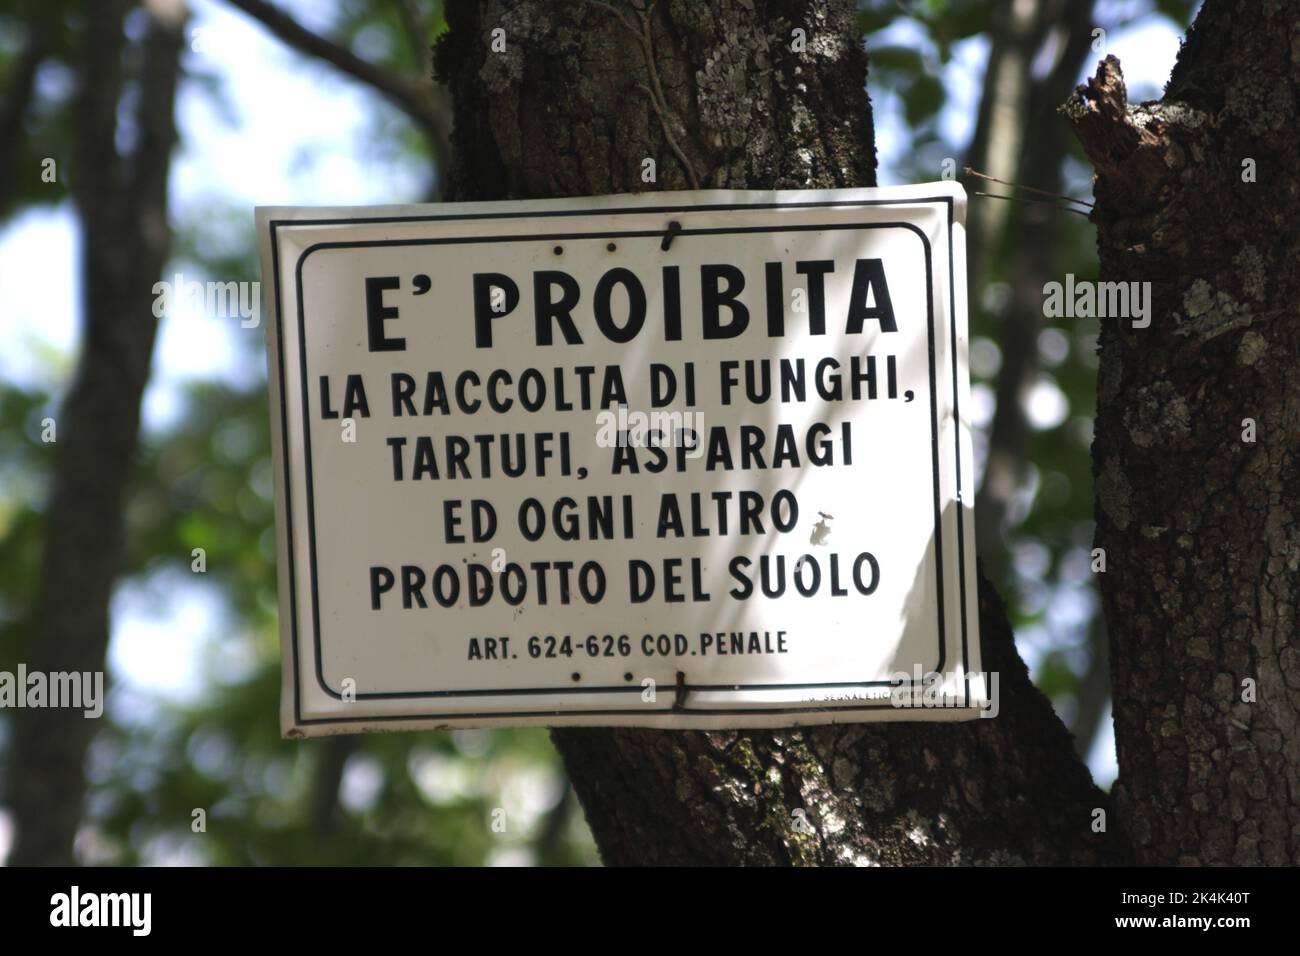 Proibita, sign in Italian prohibiting the picking of mushrooms and other wild food products, Umbria, Italy Stock Photo